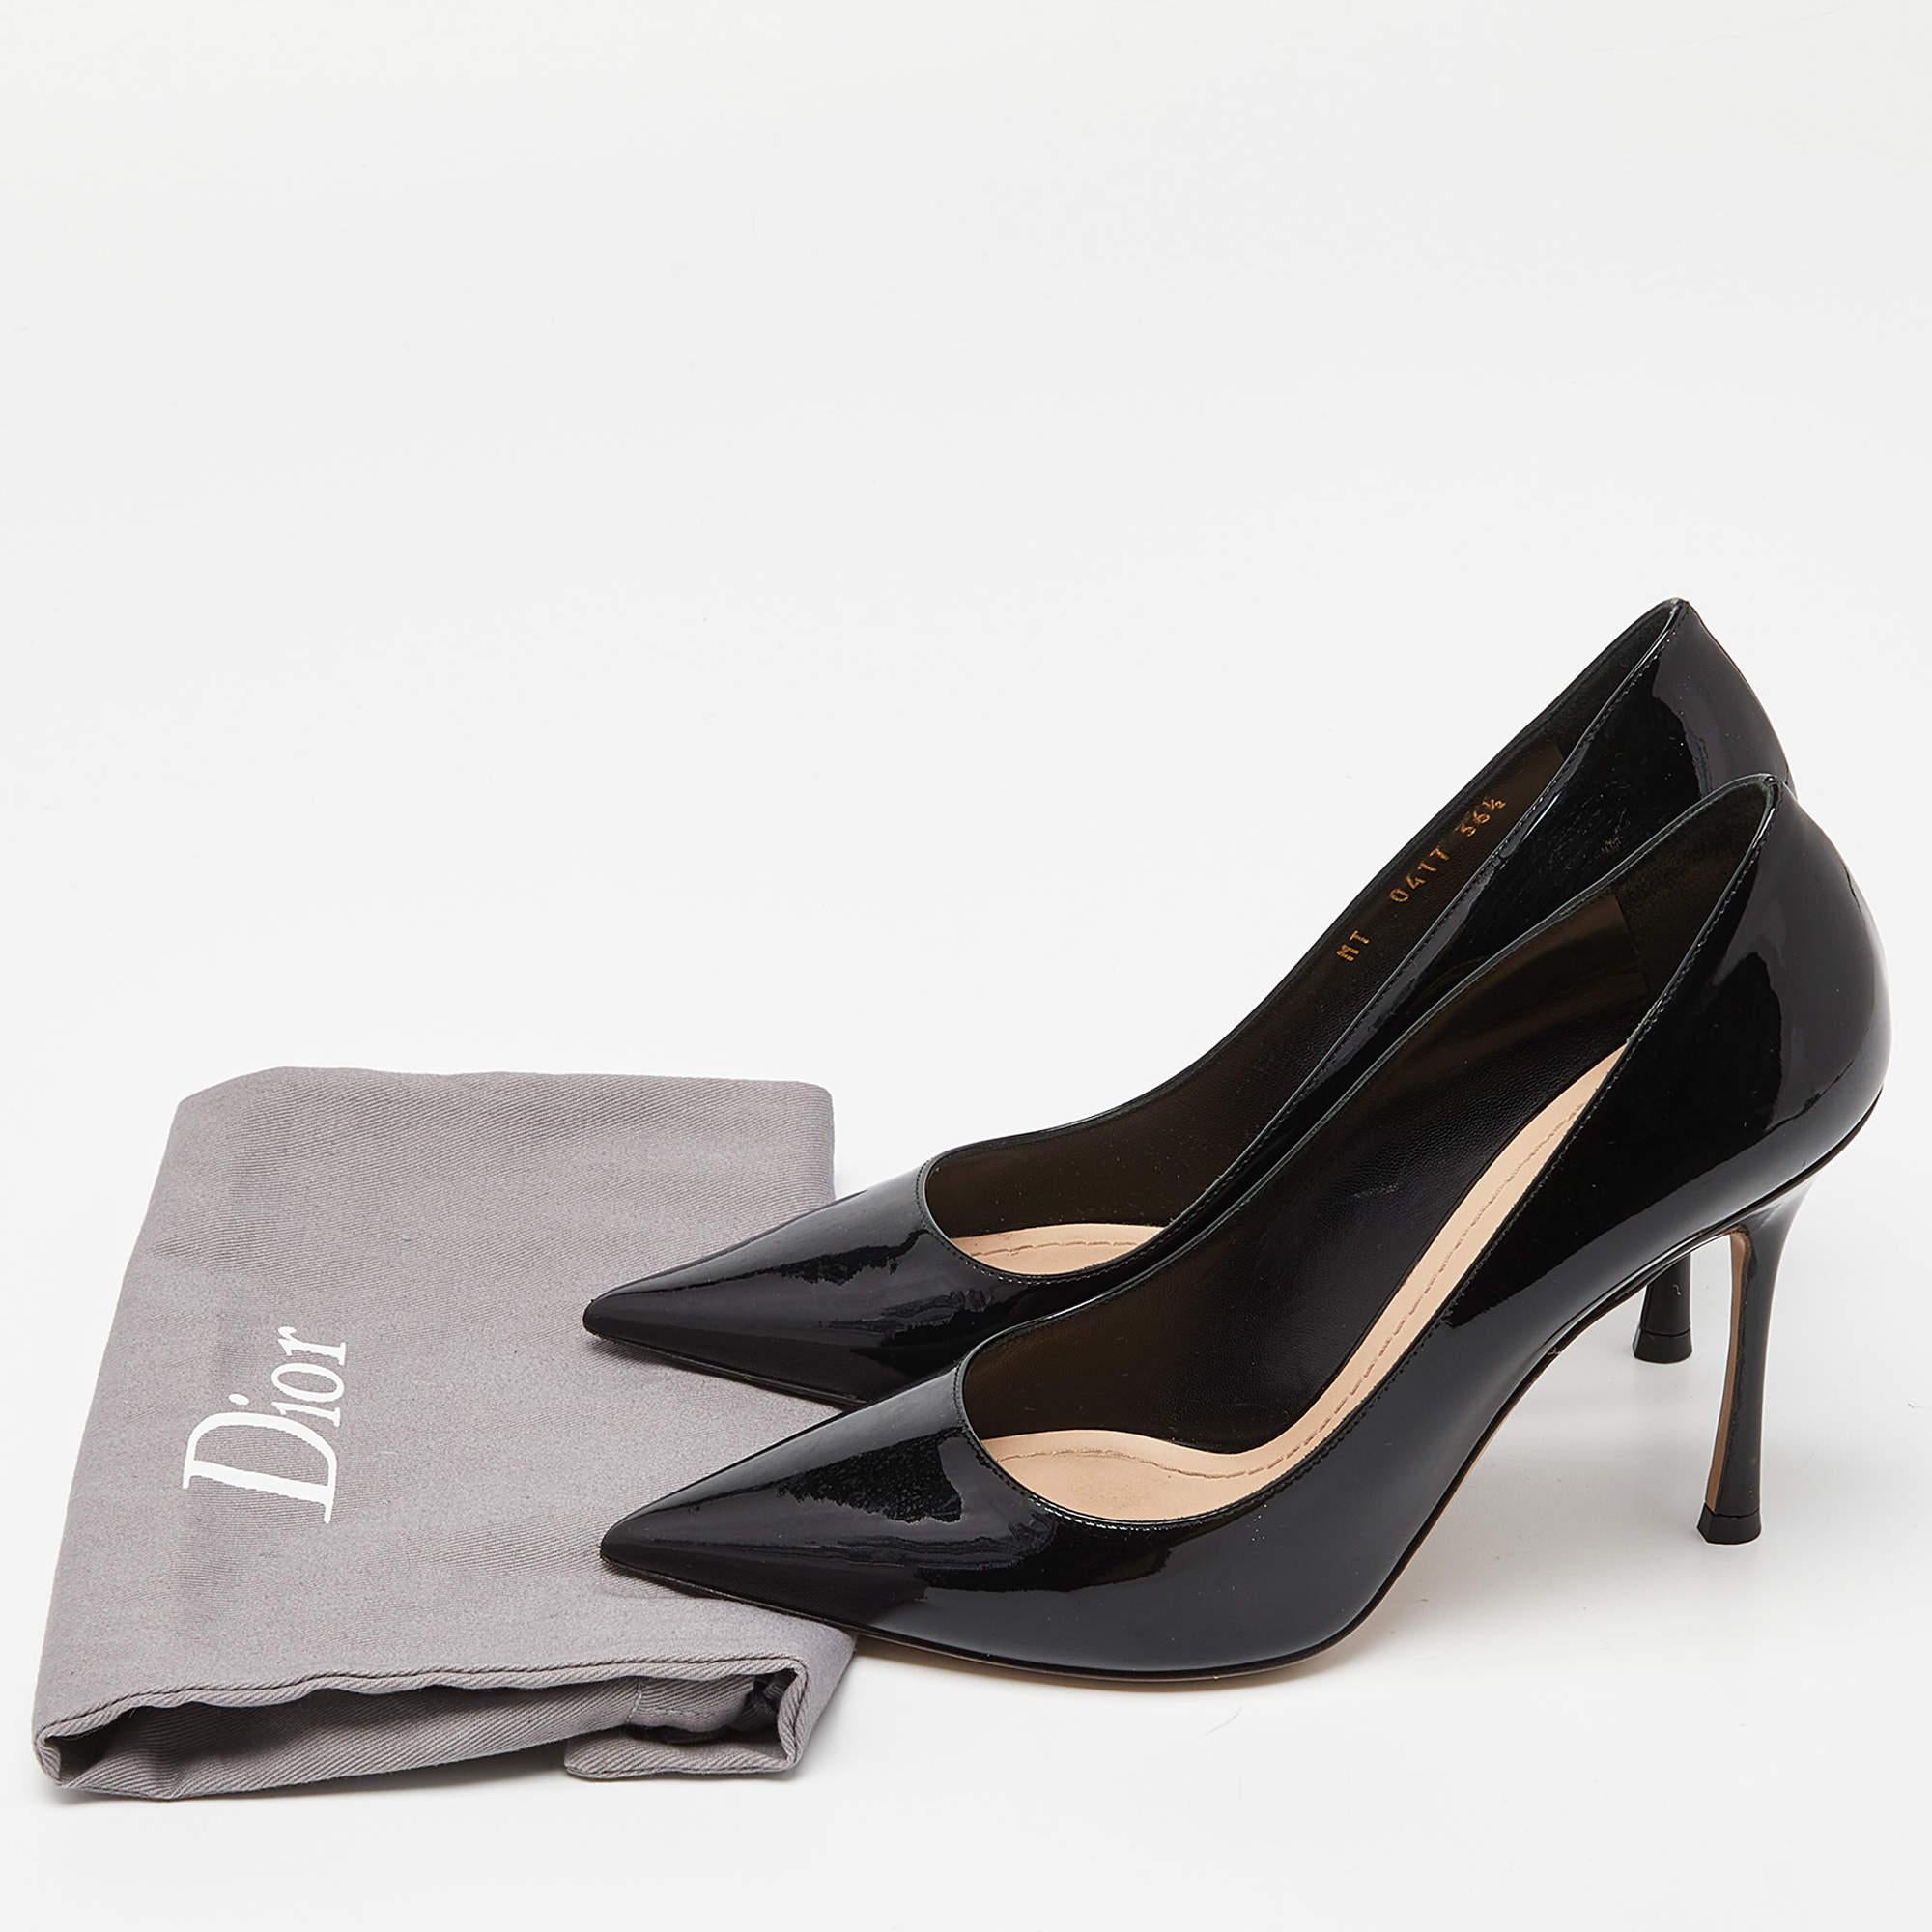 Dior Black Patent Leather Pointed Toe Pumps Size 36.5 For Sale 5